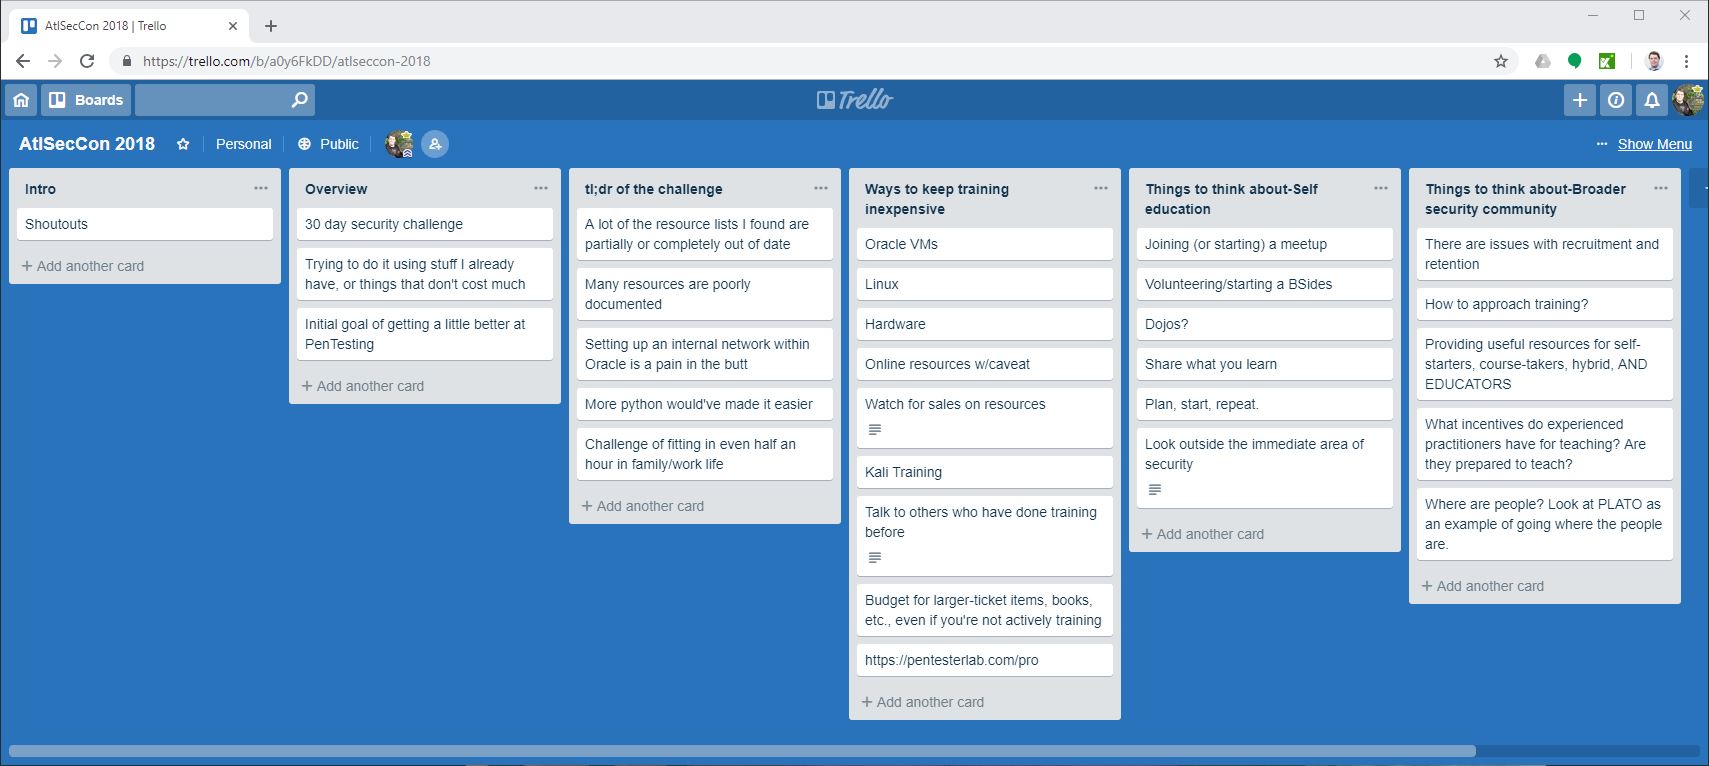 An example of a Trello board used to organize a presentation